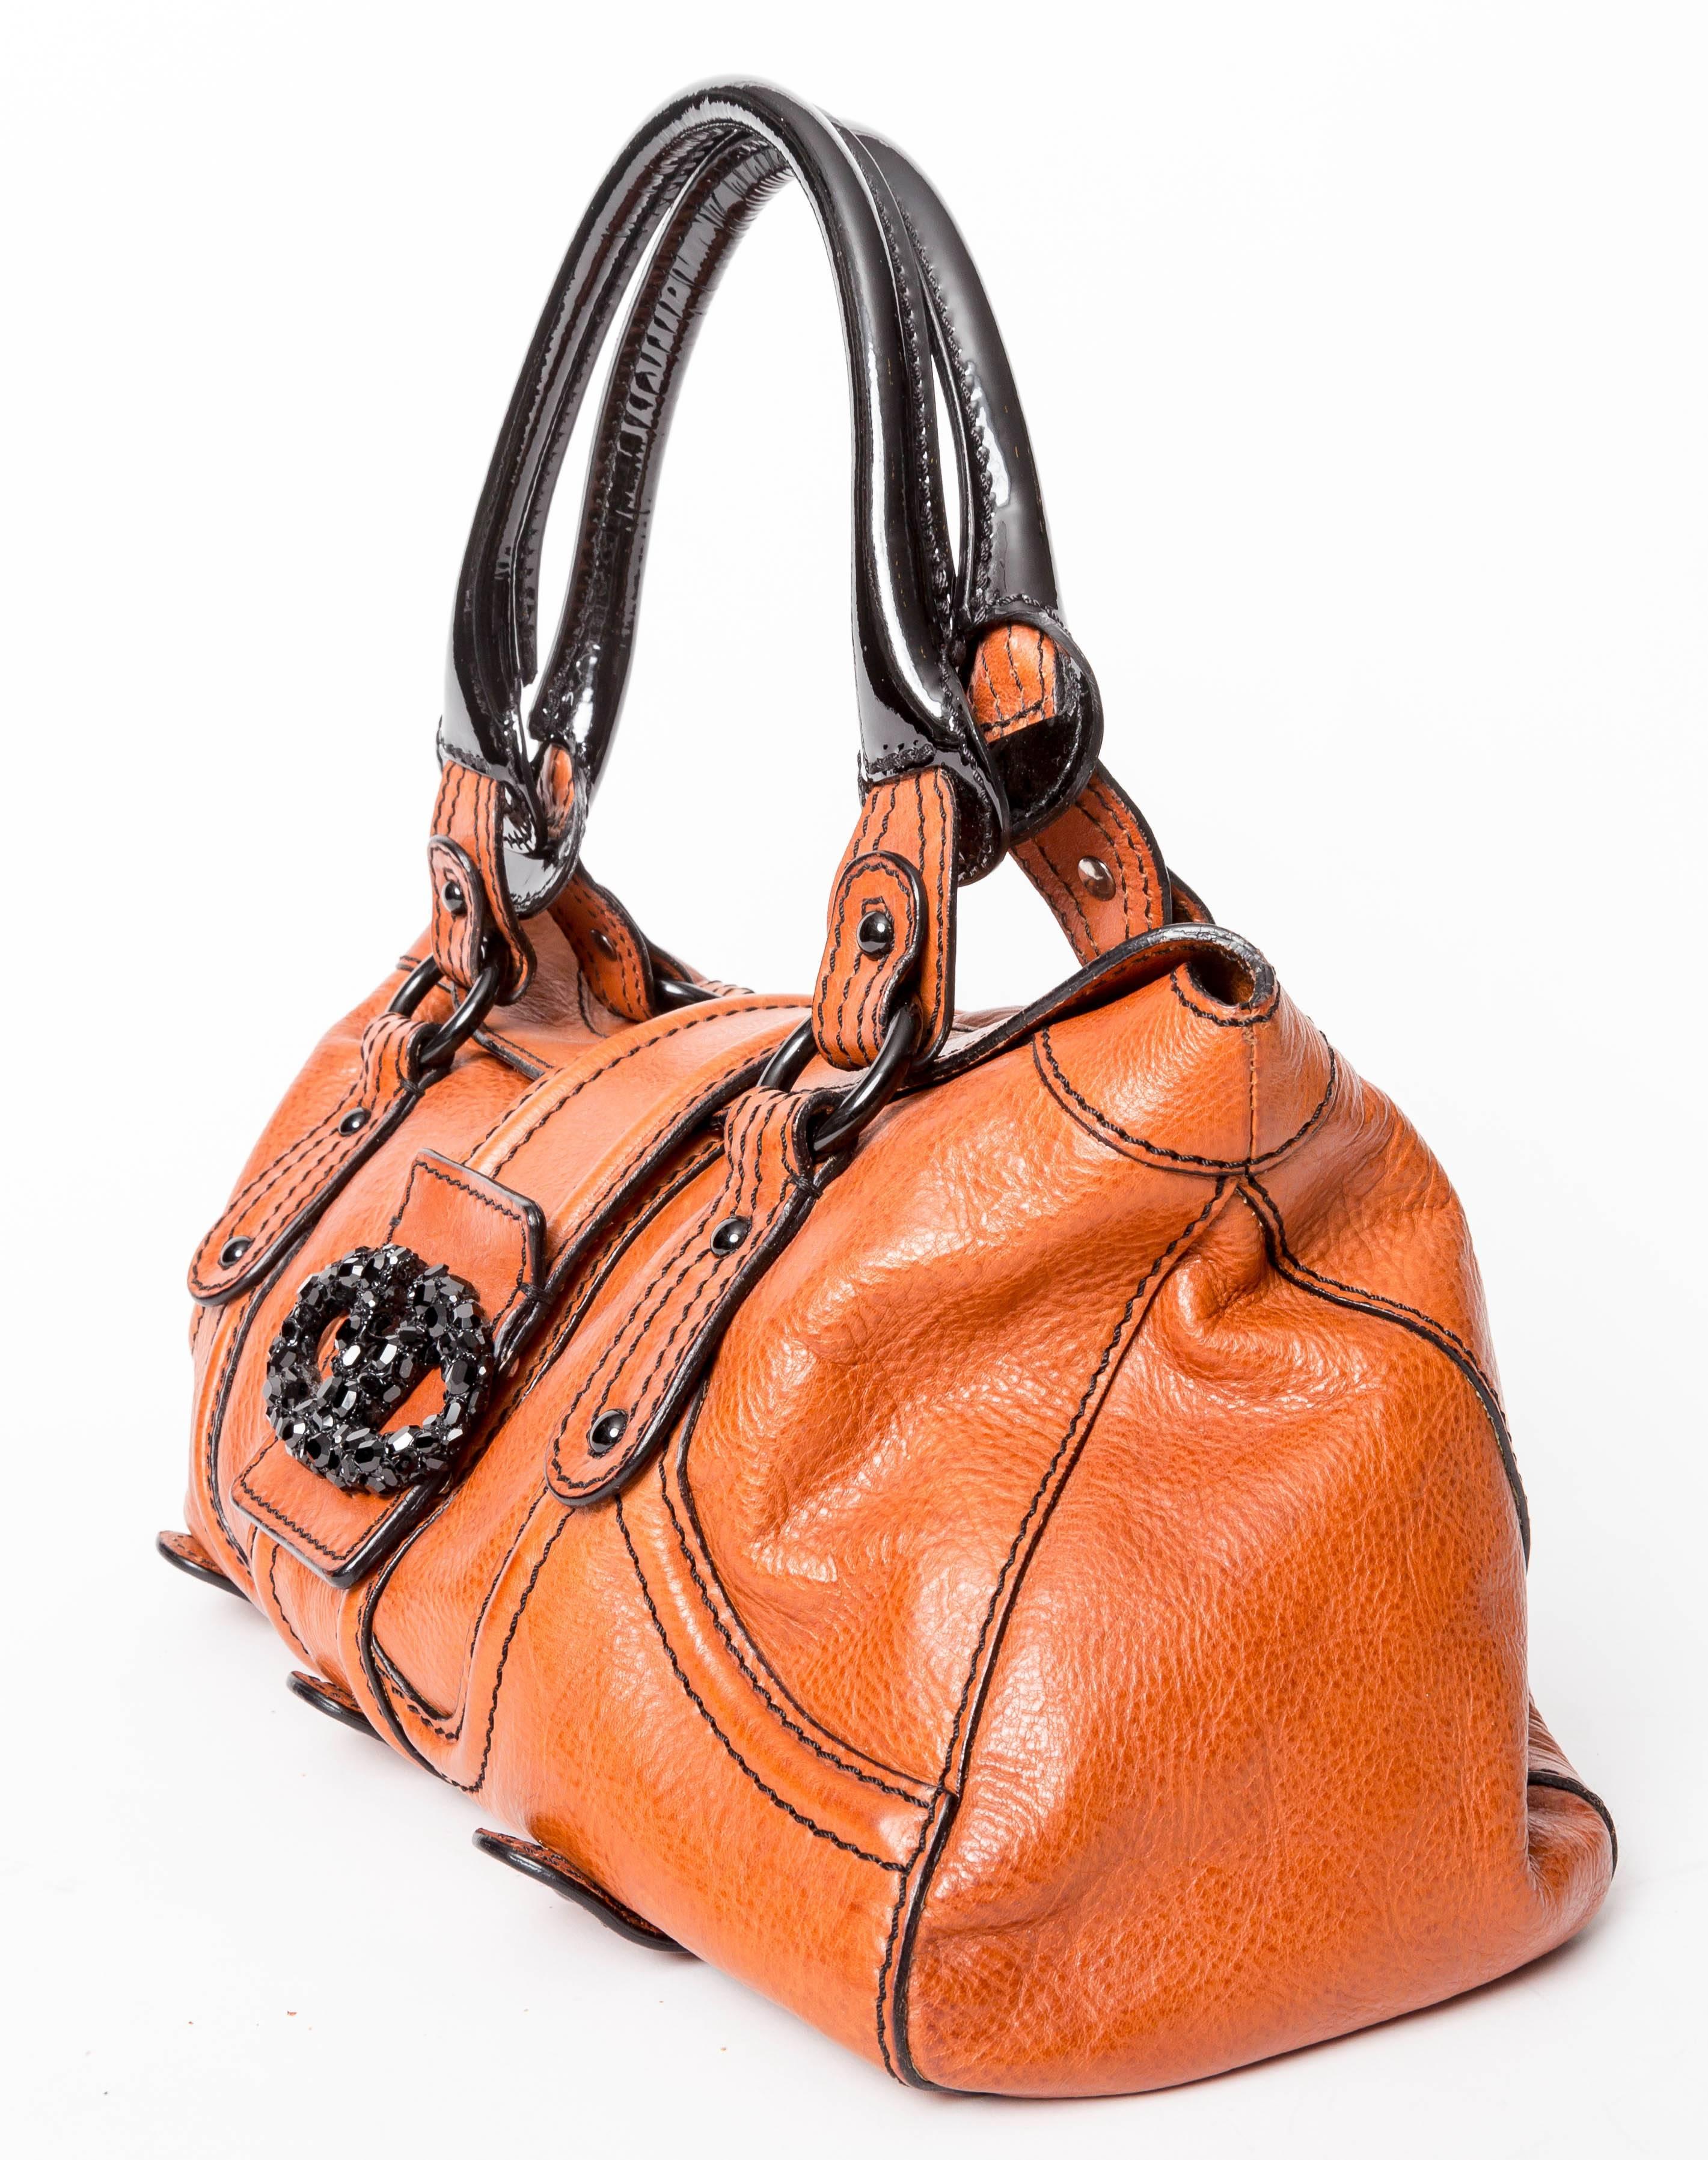 Very pretty Valentino bag in cognac leather with black patent straps and a gorgeous black swarovski crystal Valentino logo clasp. Bag closes with a strap across the top ending in one snap. This bag has one inside zip pocket and a black fabric